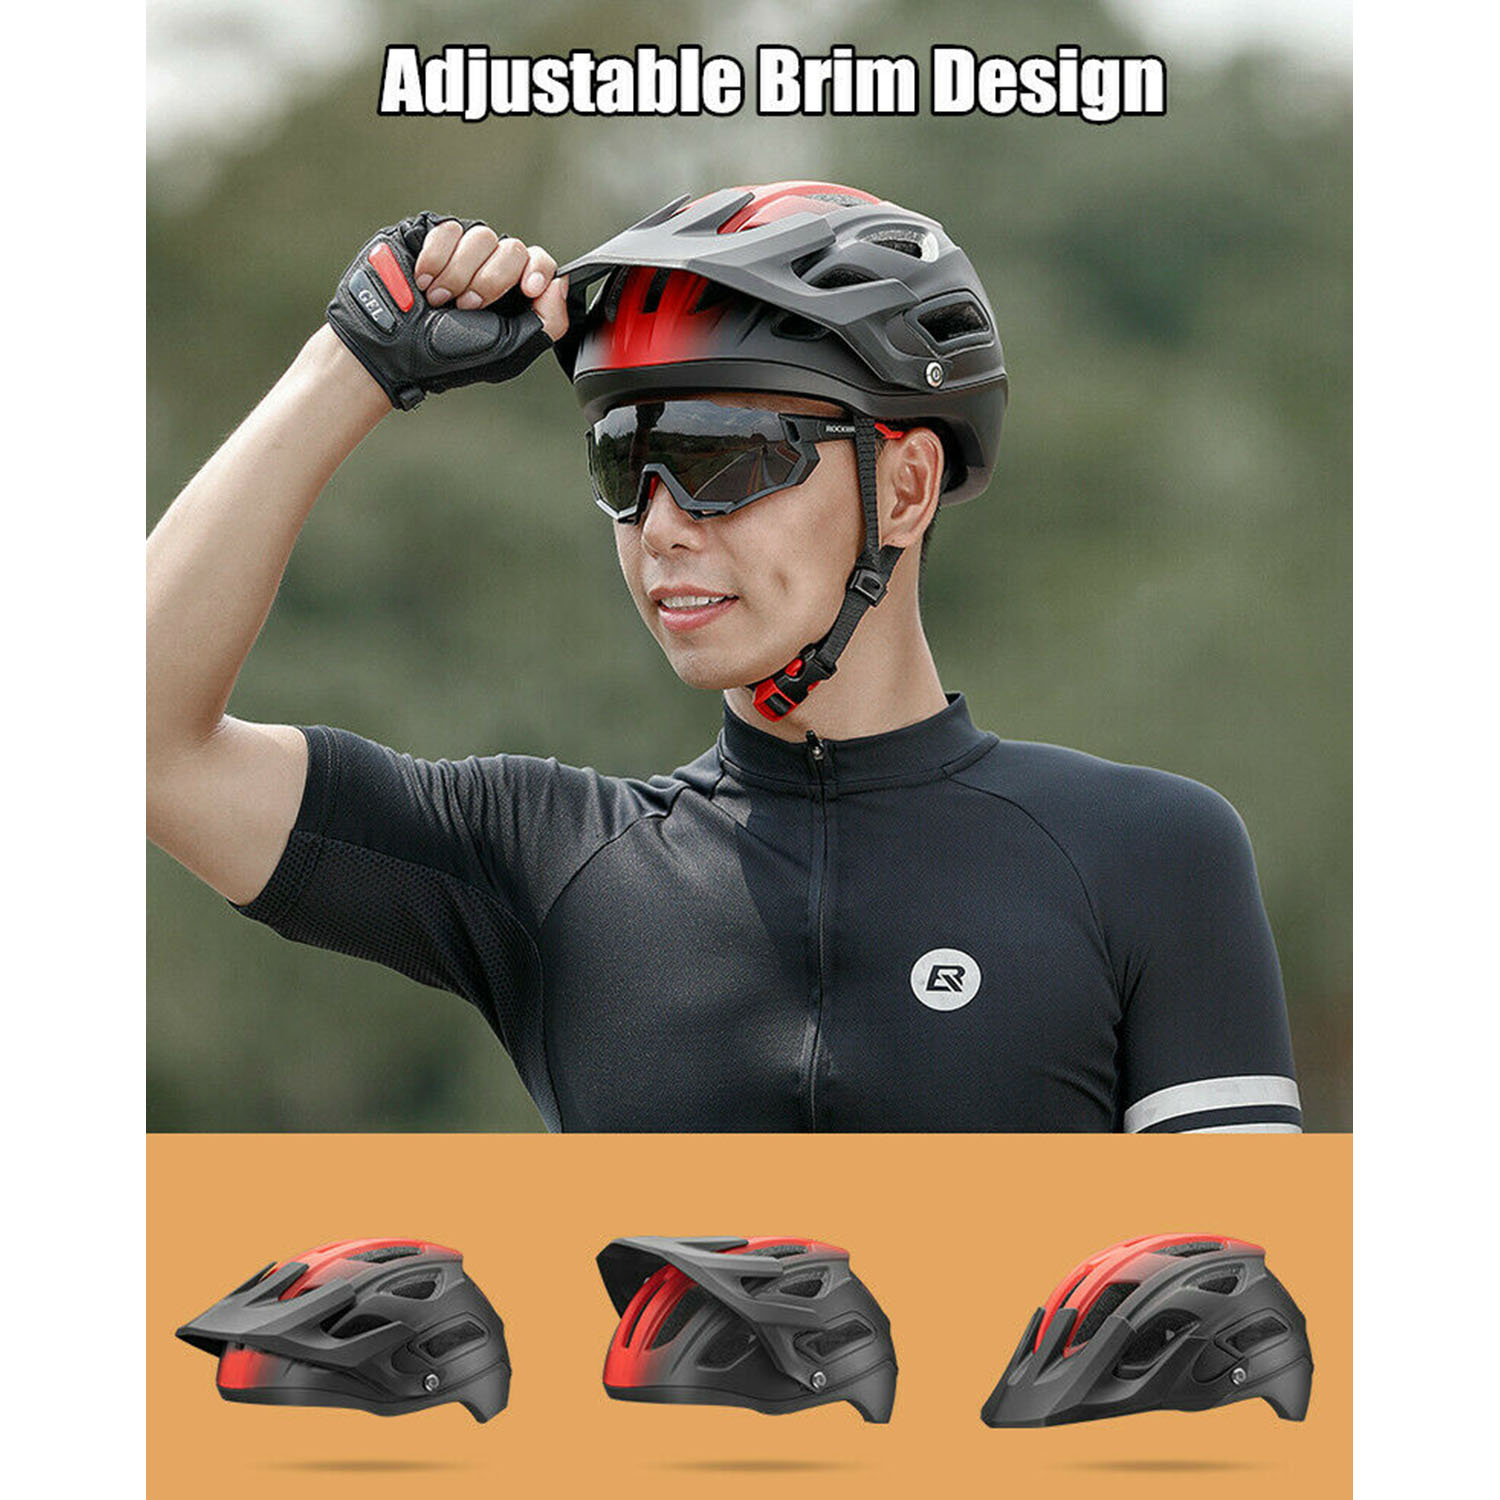 Ultralight MTB Bike Helmets Kmart For Men And Women Safe And Stylish  Mountain Aero Capacete Ciclismo For Outdoor Sports And Biking 236f From  Dw216, $42.24